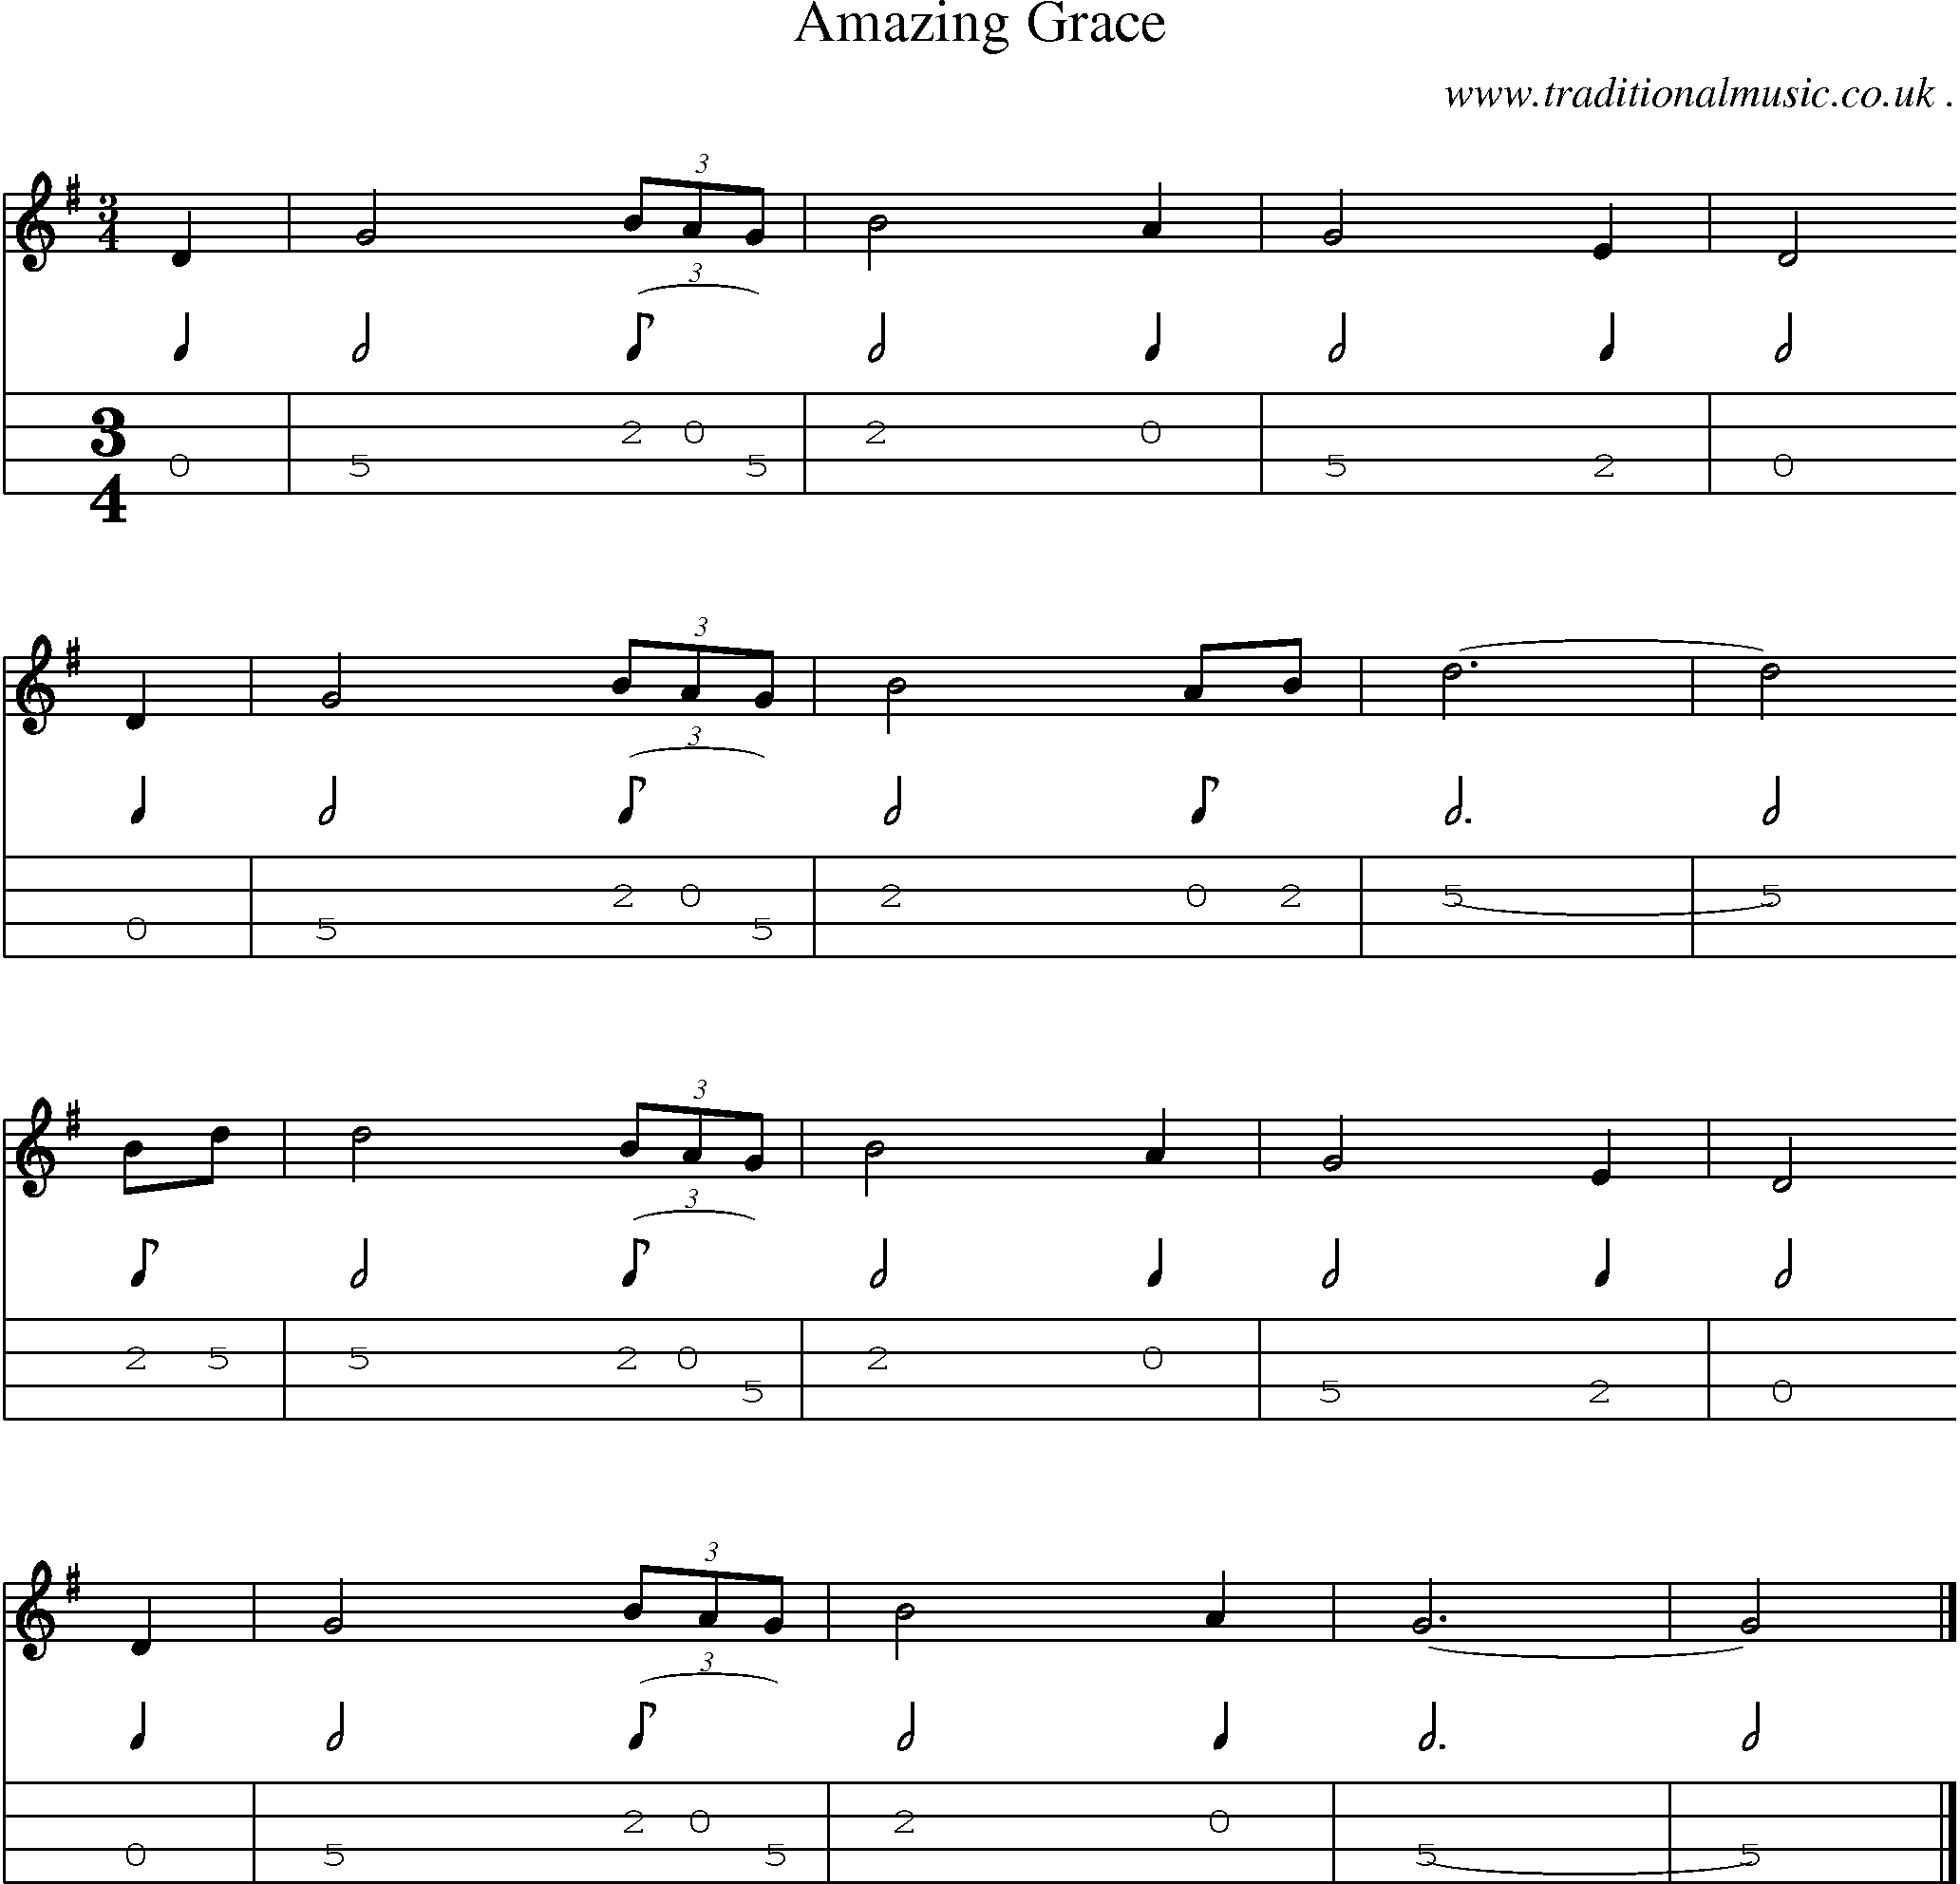 Sheet-music  score, Chords and Mandolin Tabs for Amazing Grace